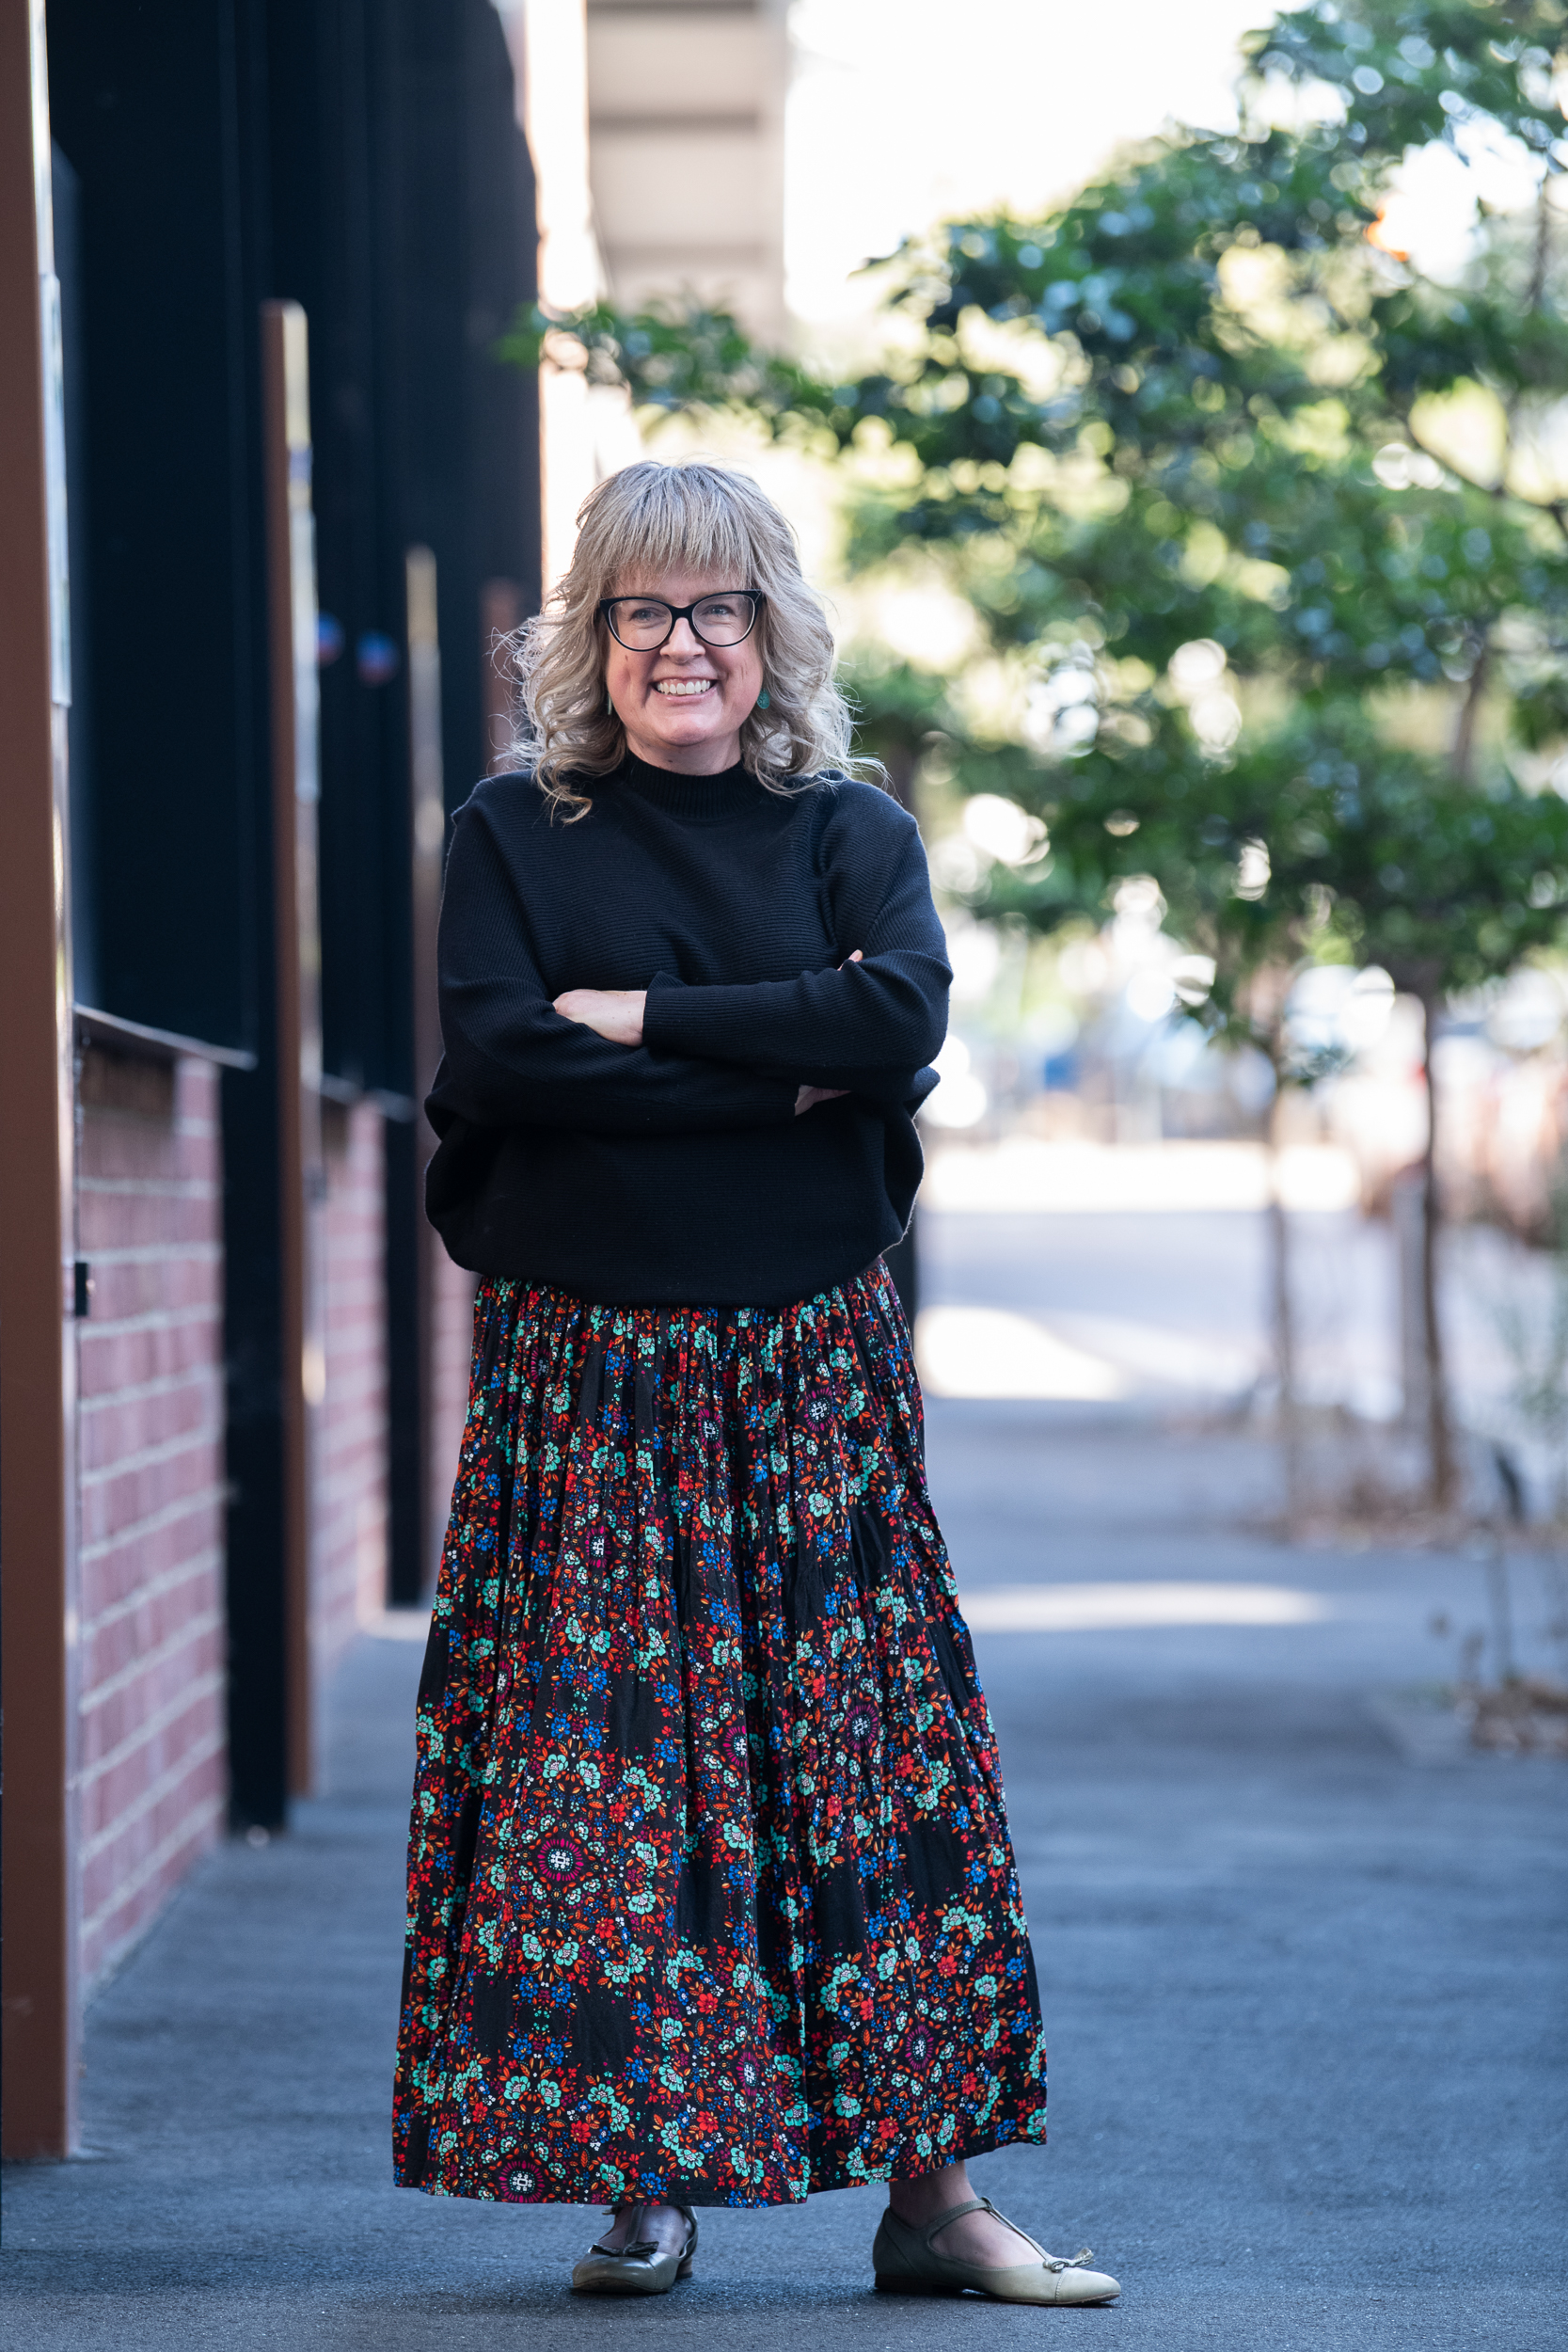 Woman stands on Melbourne street wearing black long sleeved top and patterned skirt. She has a relaxed pose and is smiling, while looking away from camera.